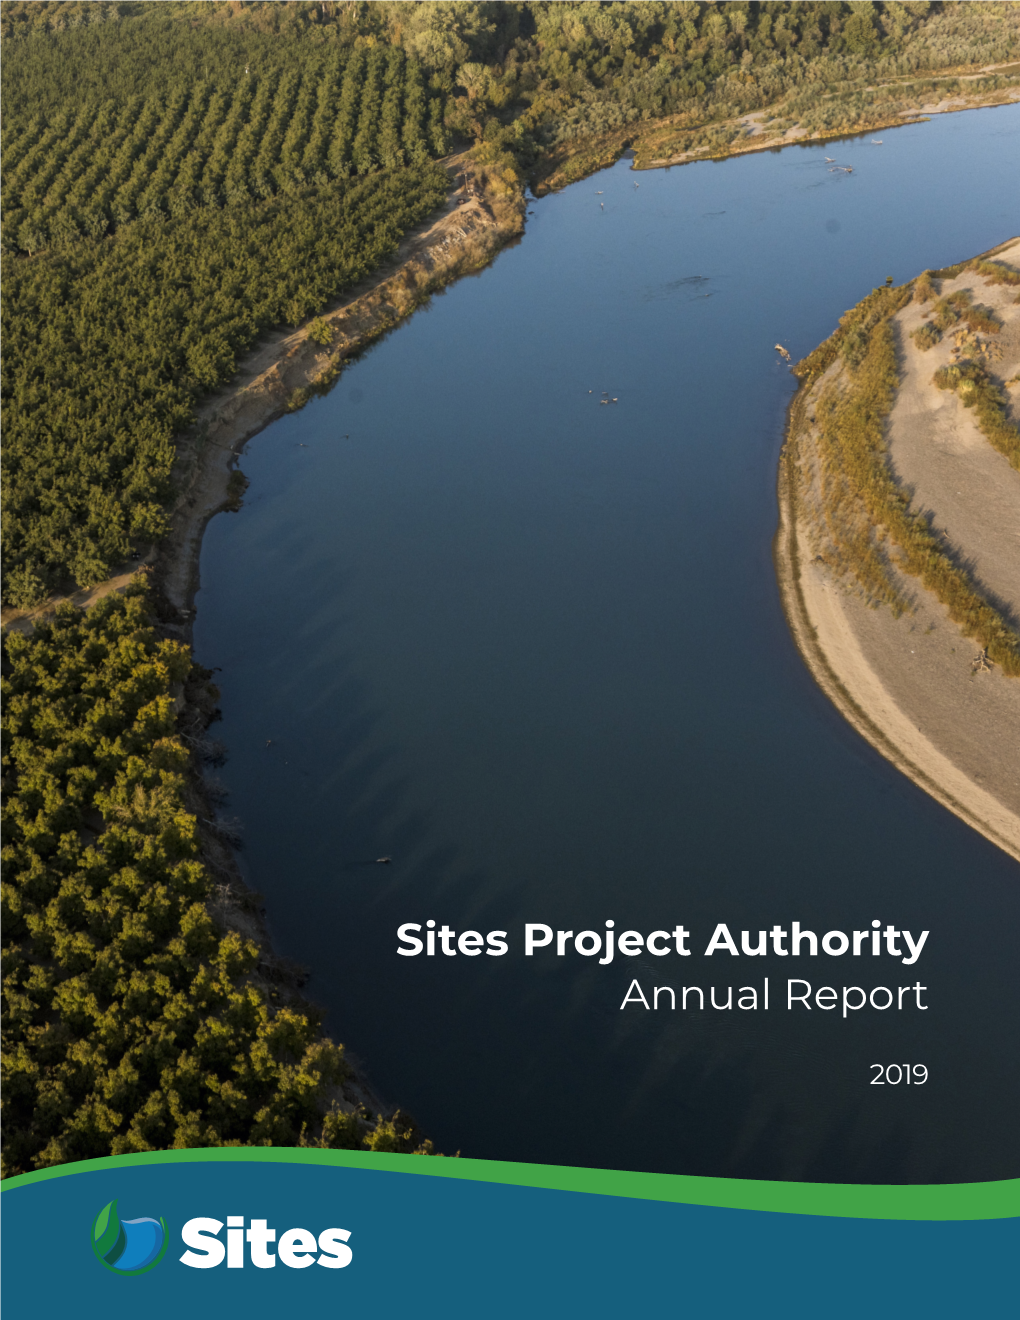 To View the 2019 Sites Project Authority Annual Report